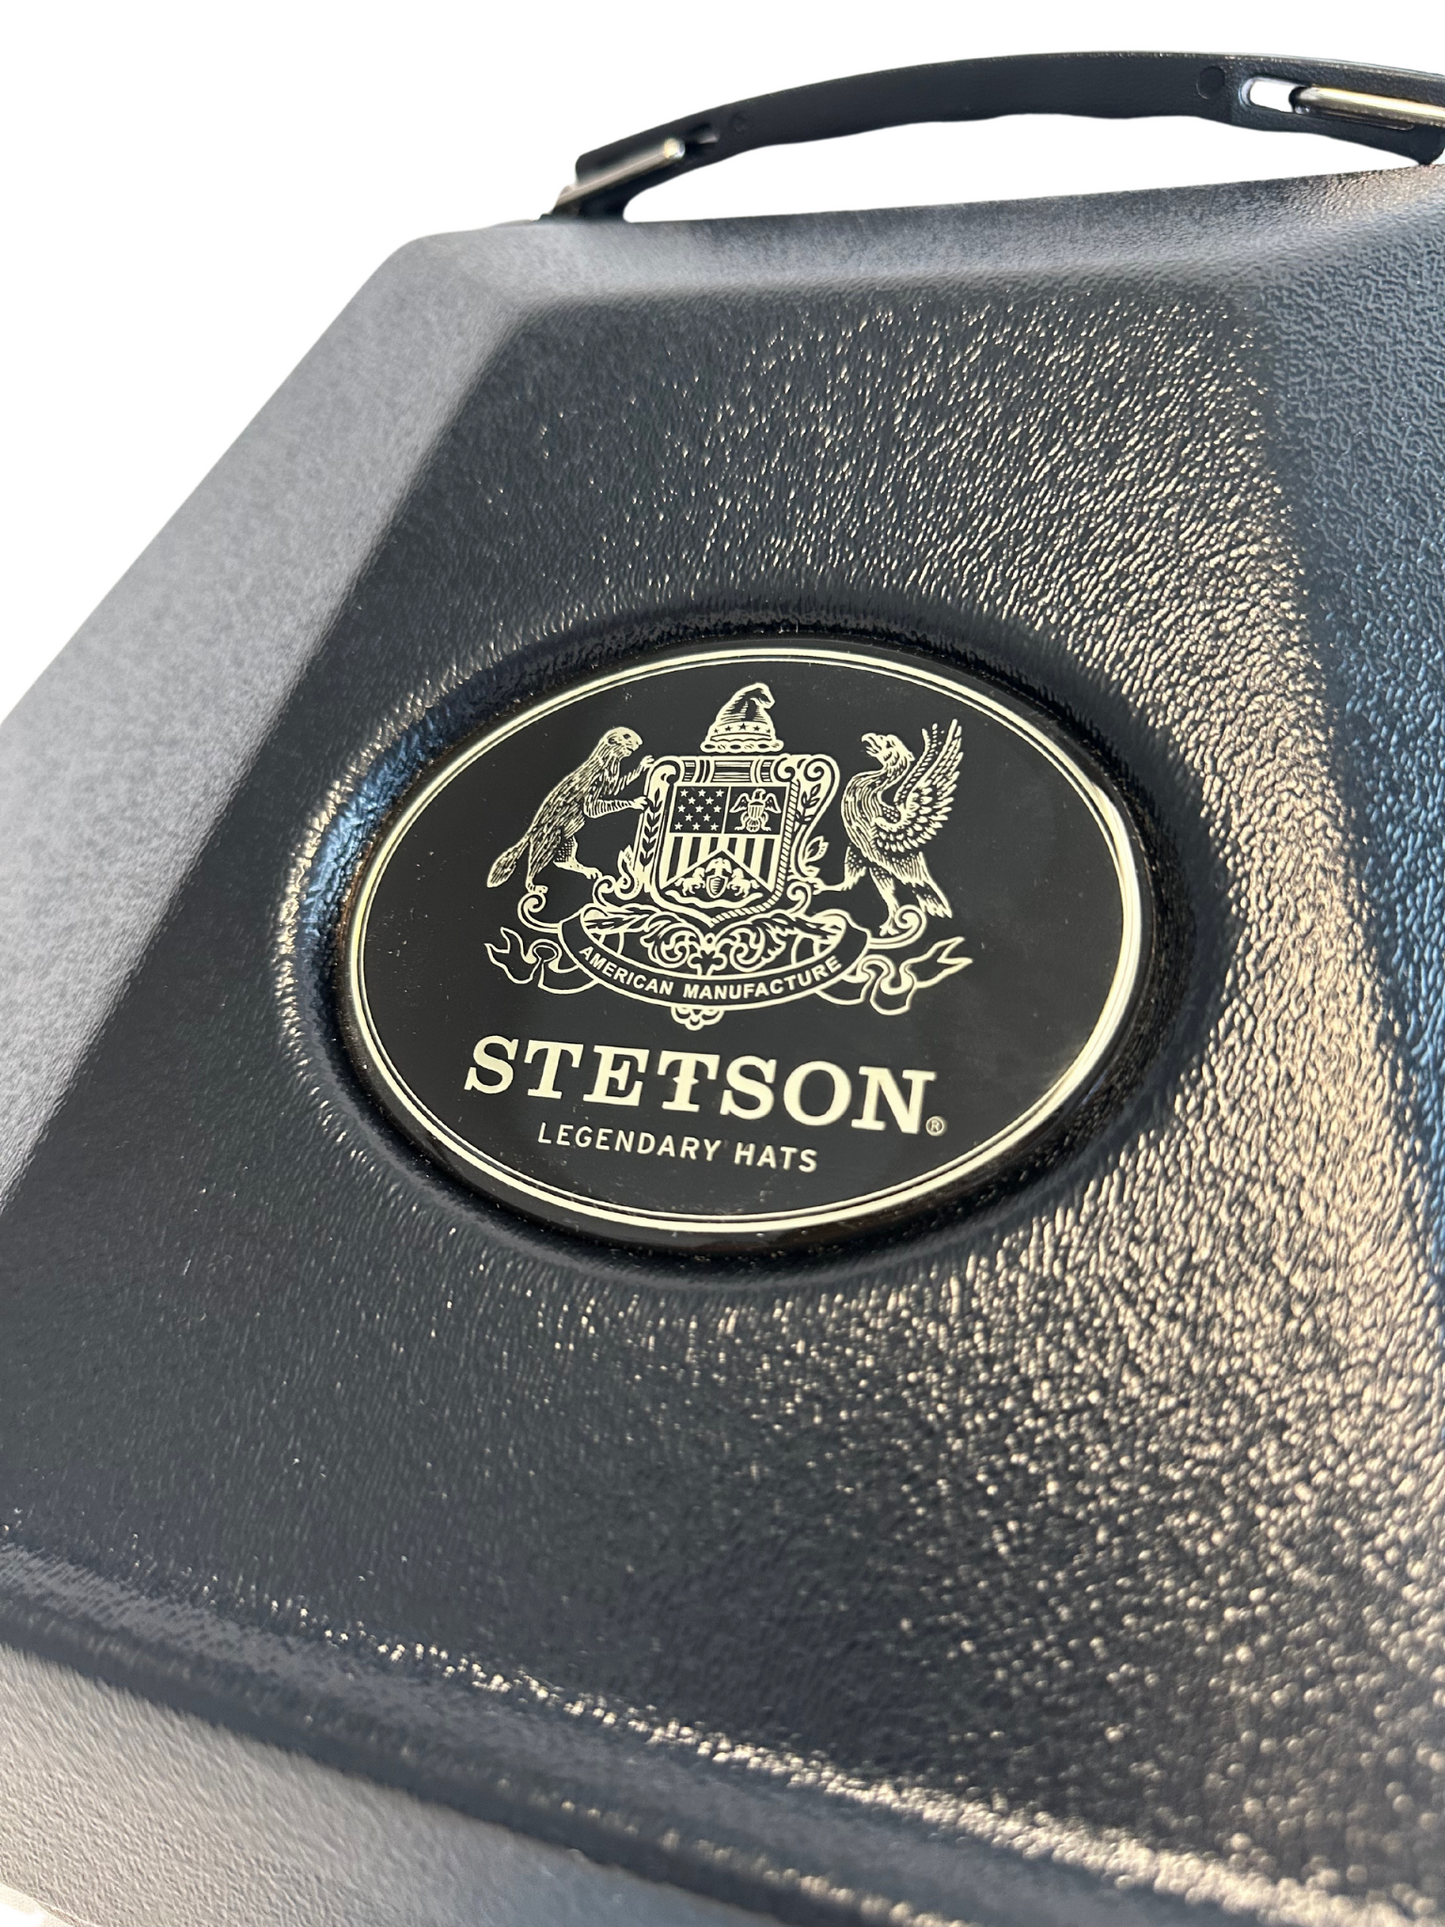 Stetson Classic Western Travel Hat Carrier